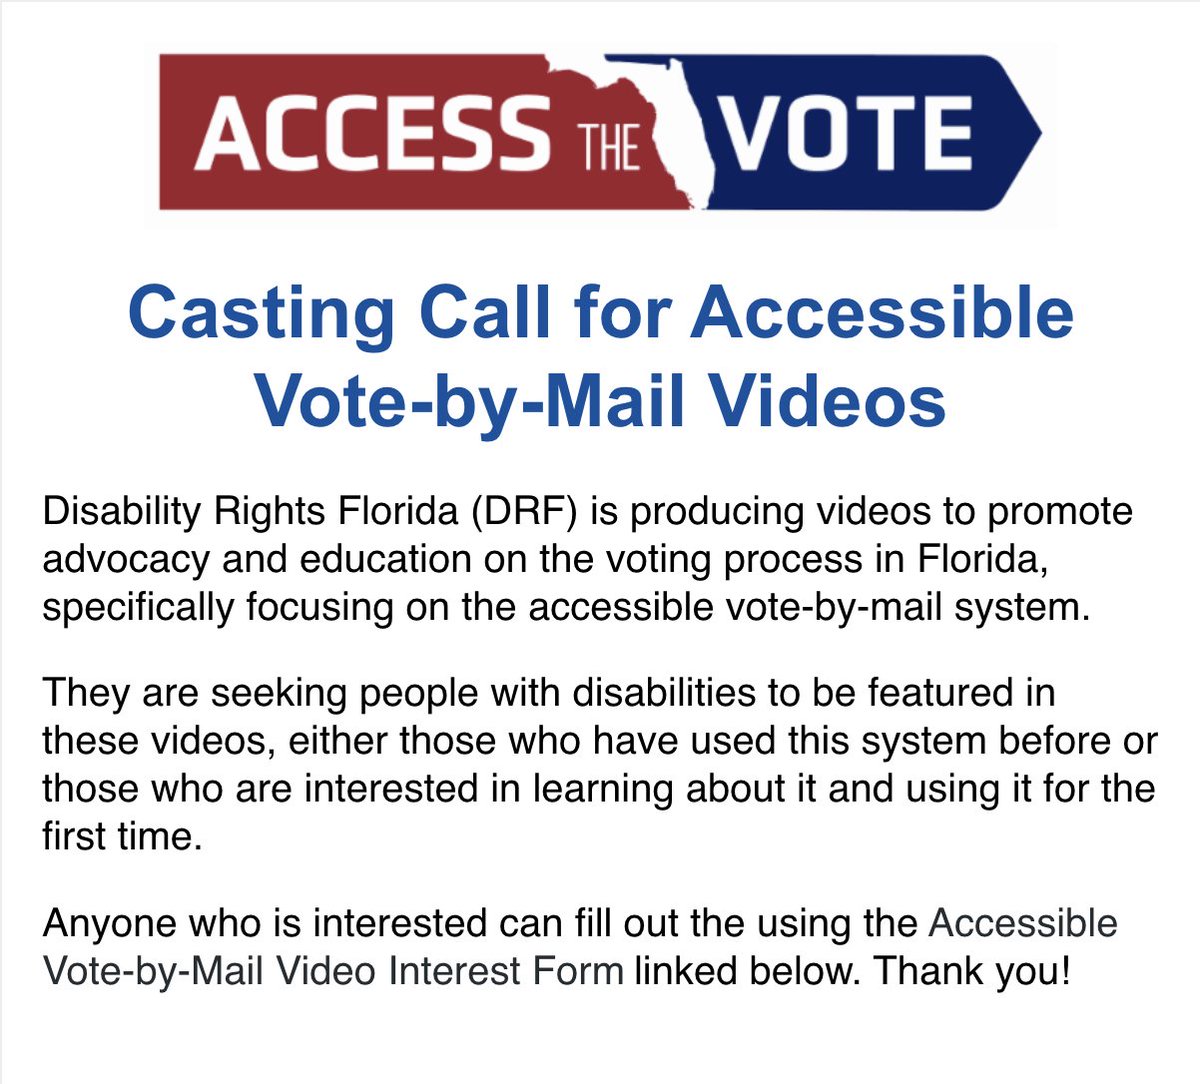 Casting Call for Accessible Vote-by-Mail Videos

@DisabilityRtsFL is producing videos about Florida's accessible vote-by-mail voting process.

They are seeking Floridians with disabilities to be featured in these videos: surveymonkey.com/r/WDVKJV2

#CripTheVote #DisabilityVote